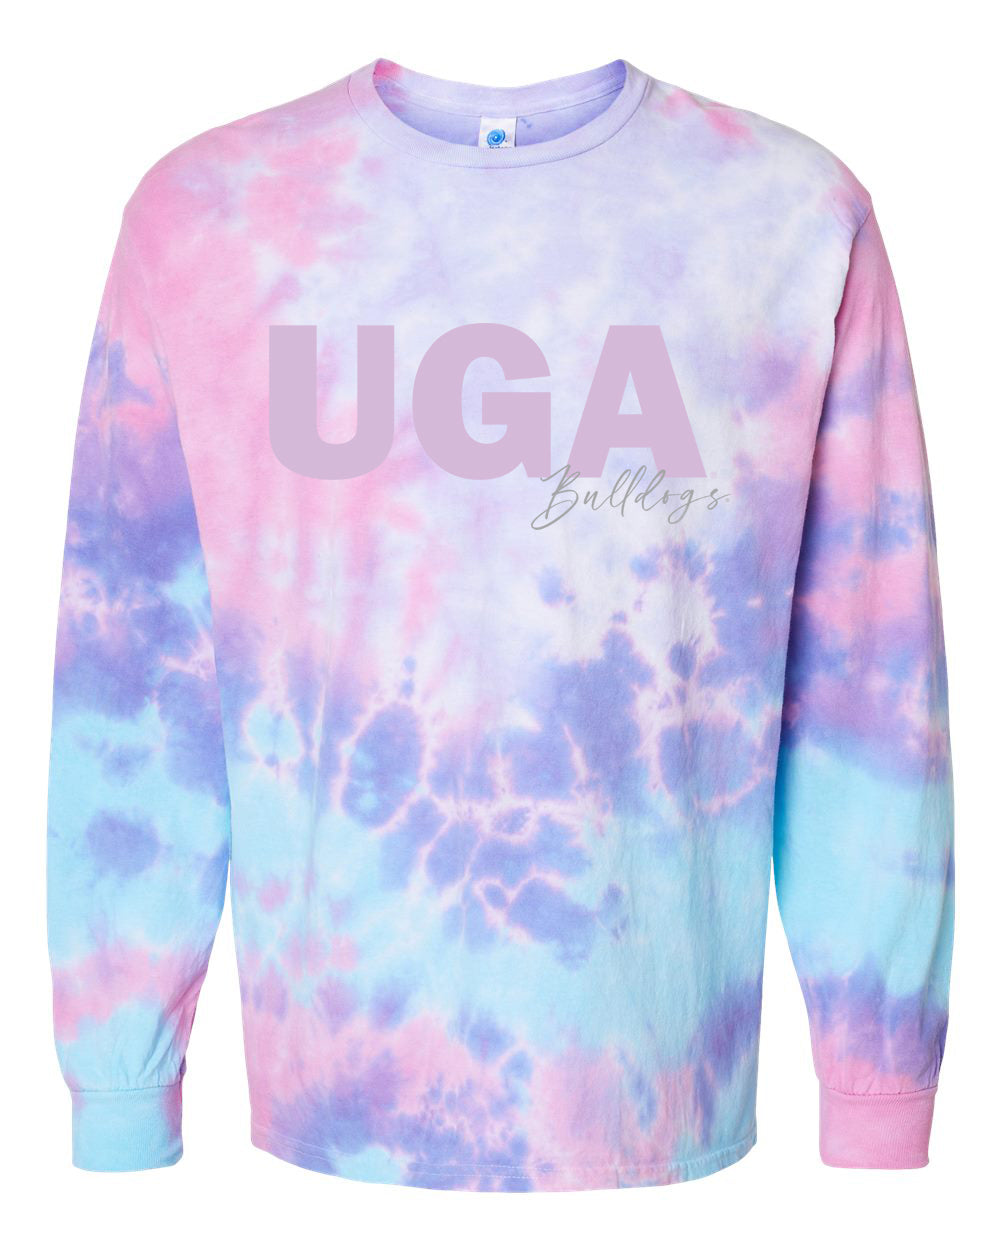 University of Georgia Spring Fling Long Sleeve Tee in Cotton Candy